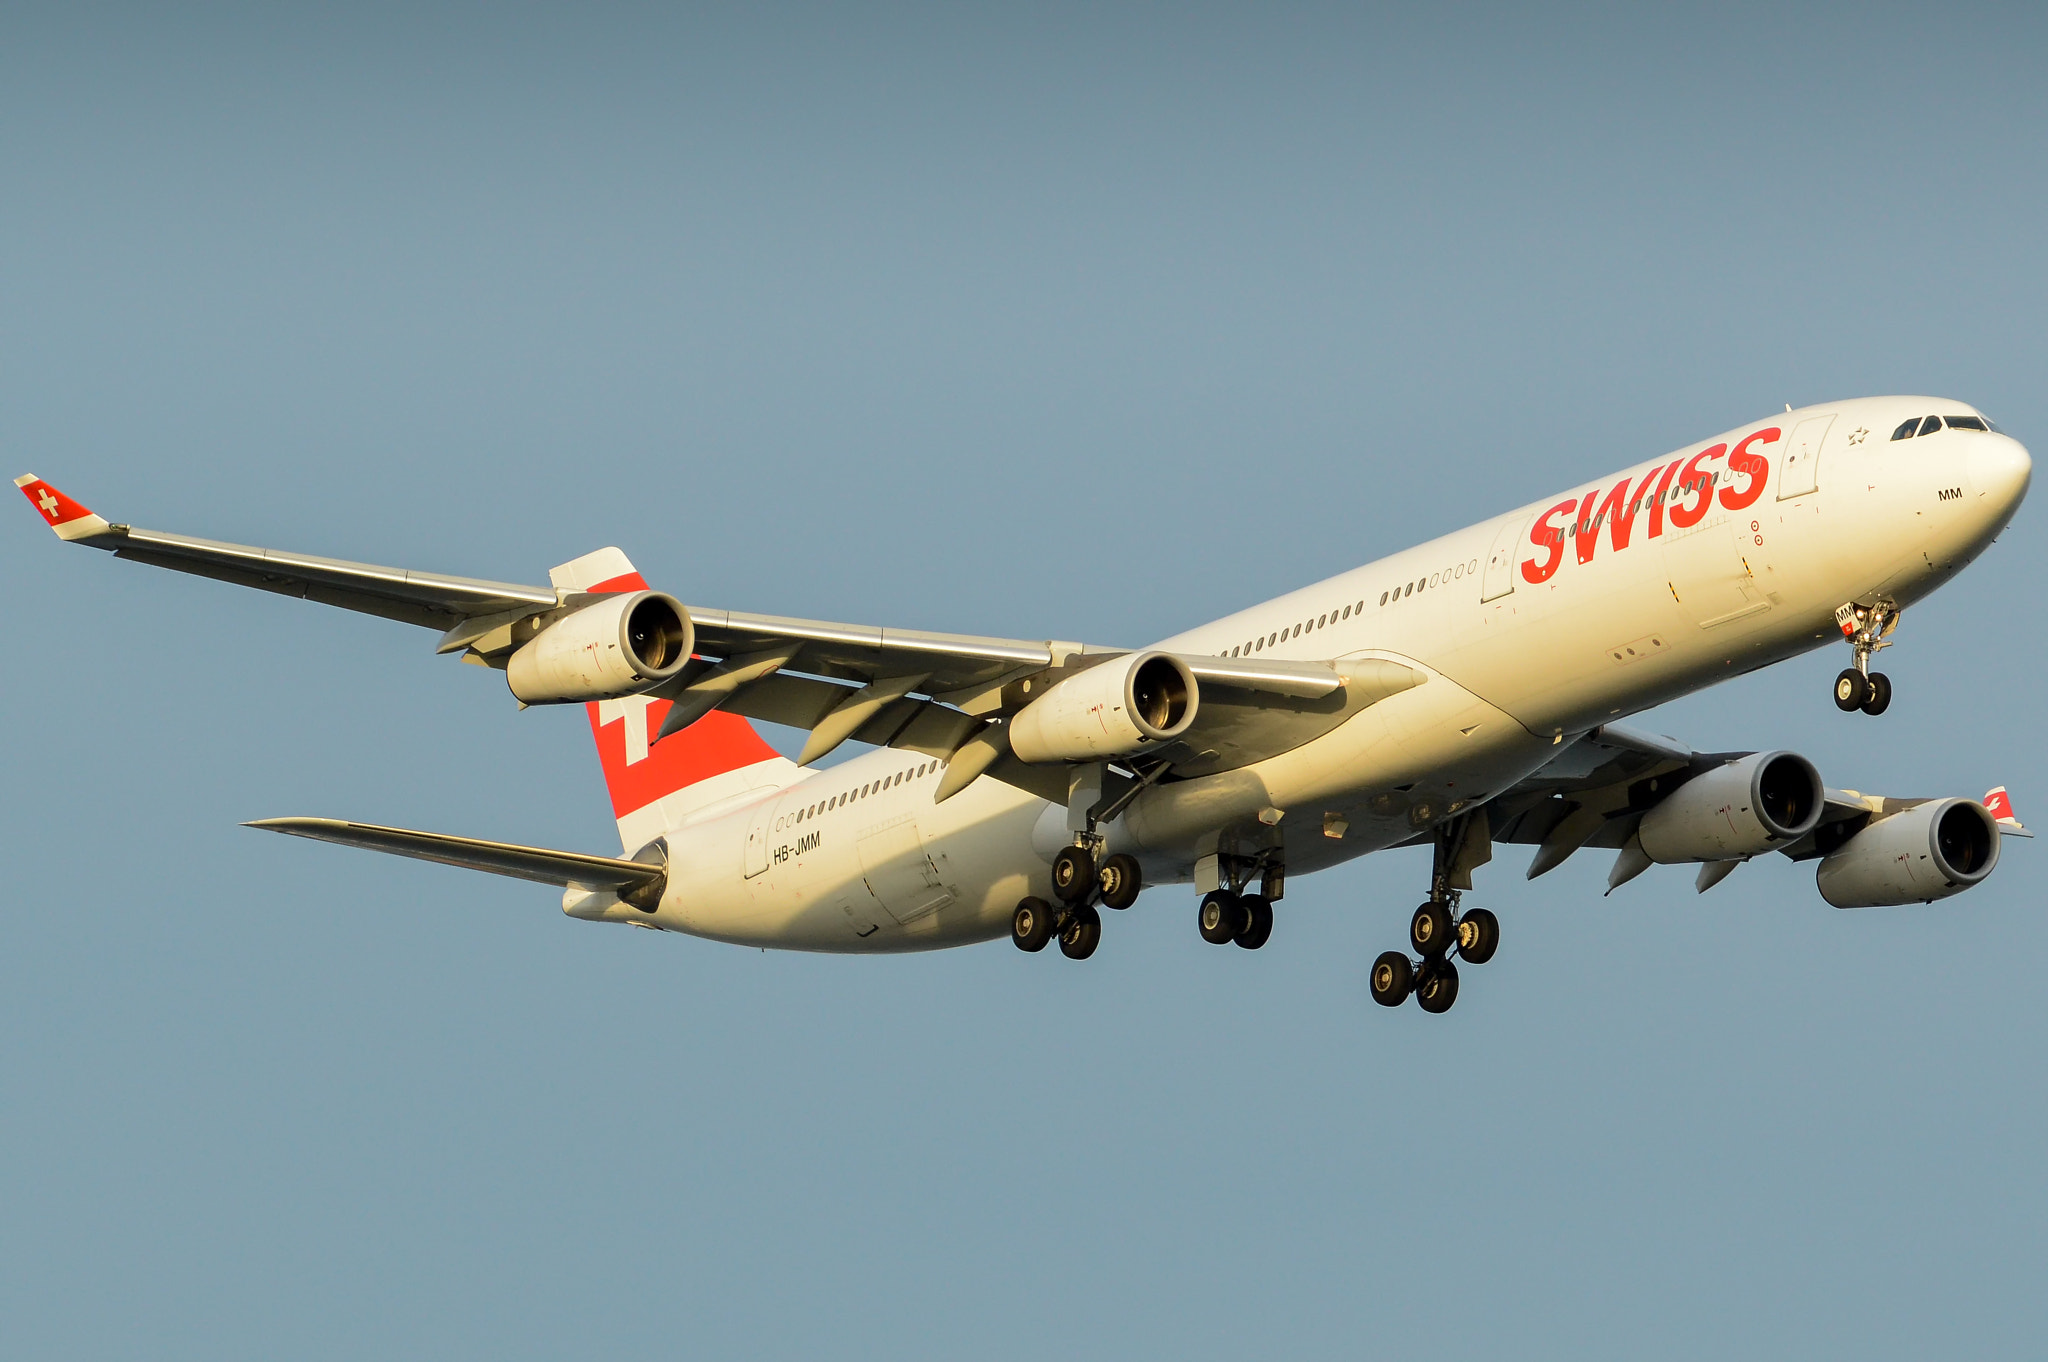 Nikon D3200 sample photo. Swiss a340 in some nice contrast. photography